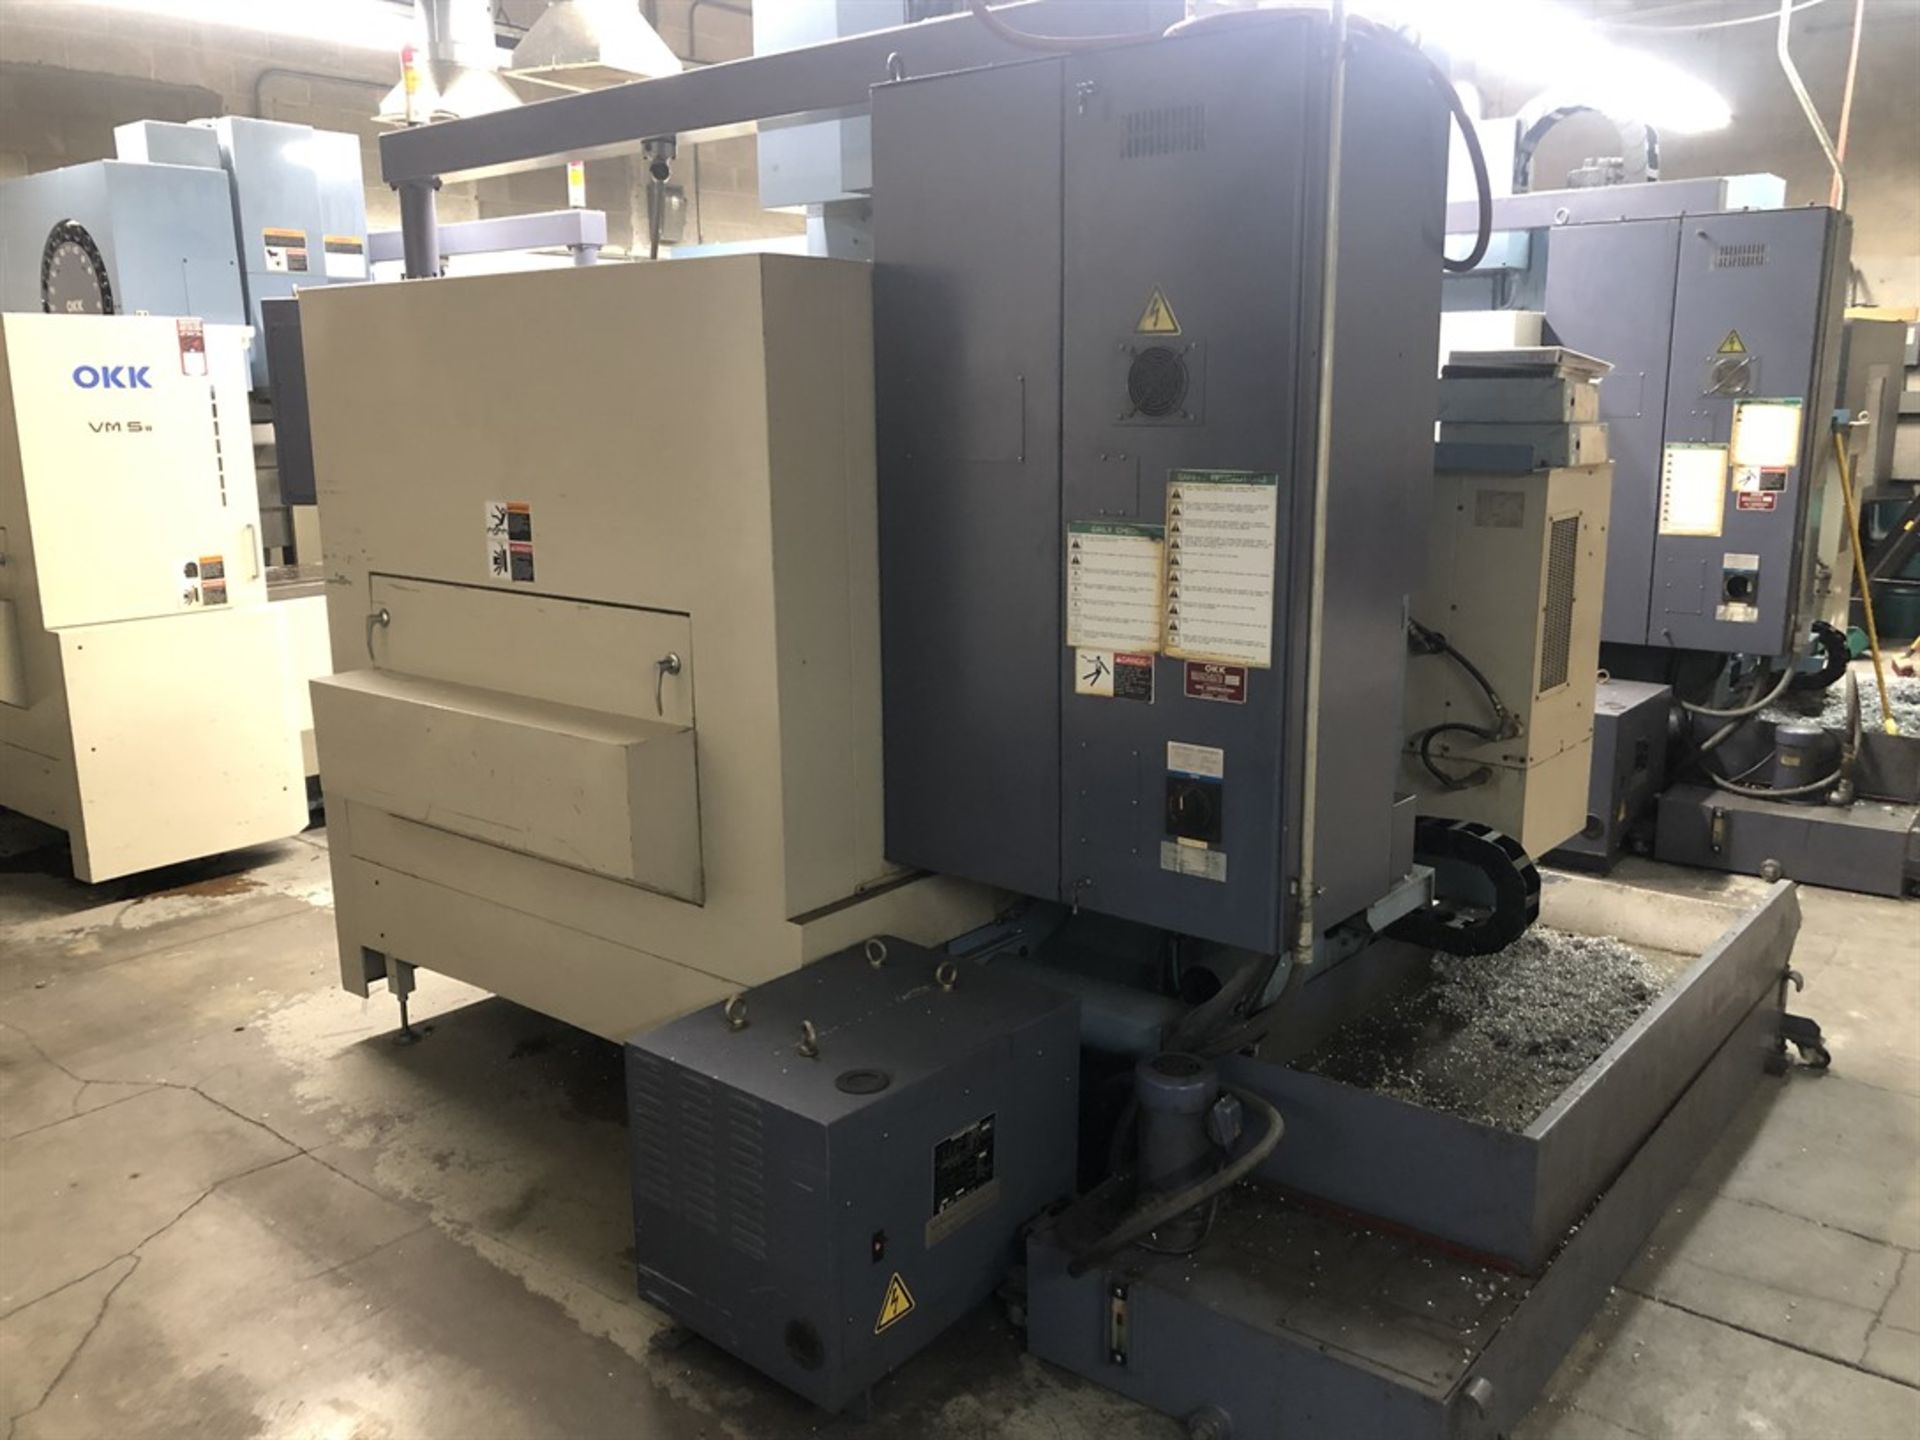 OKK VM5II Vertical Machining Center, s/n, 451, Neomatic 635 Control, 22” x 41” Table, CT40 Spindle - Image 3 of 10